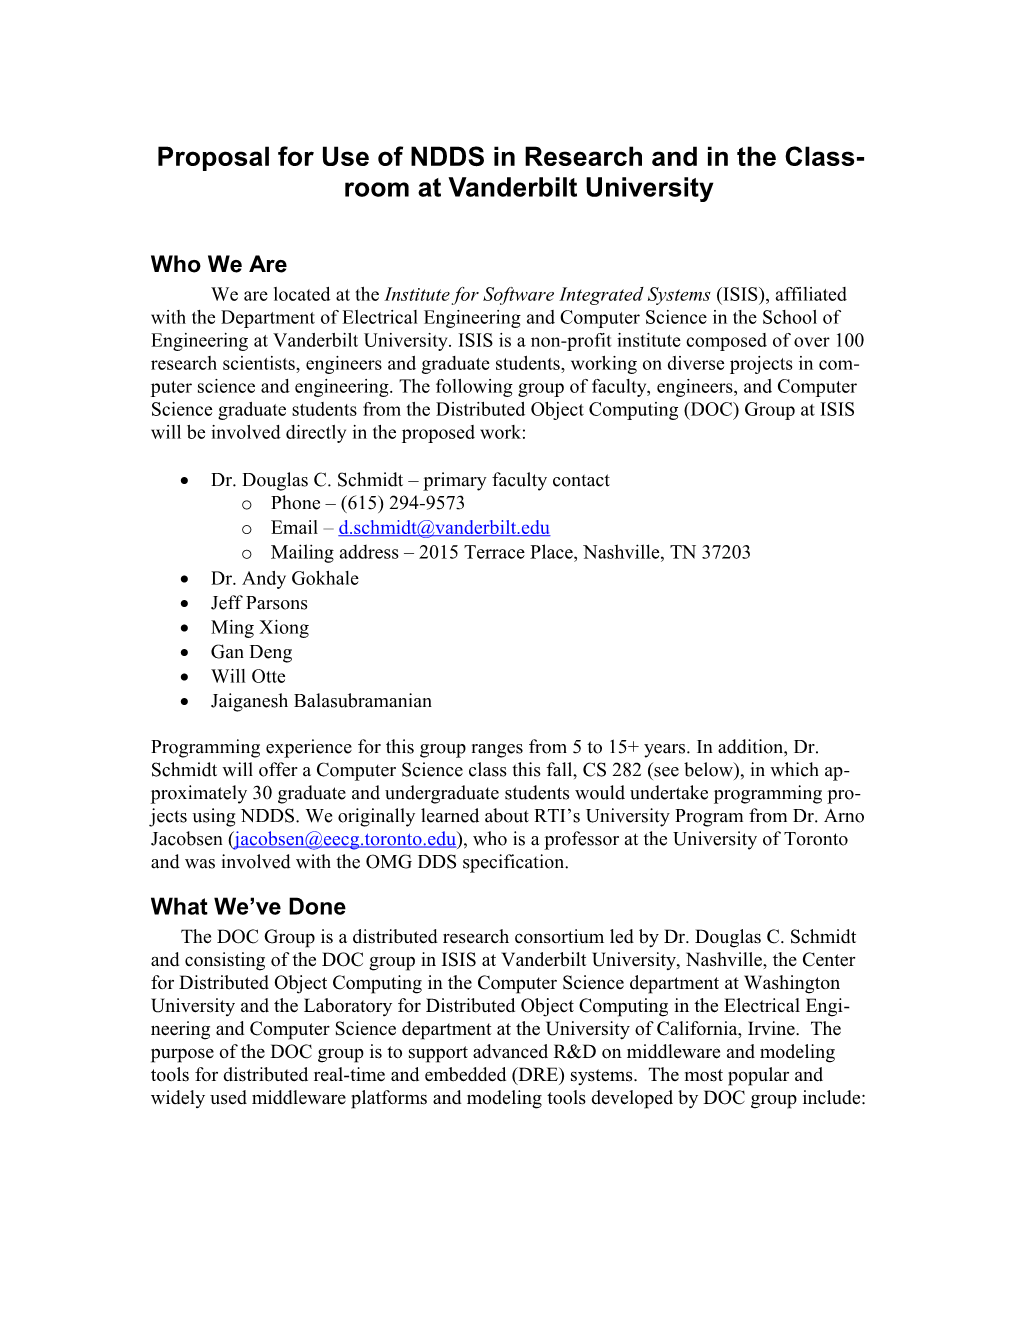 Proposal for Use of NDDS in Research and in the Classroom at Vanderbiltuniversity